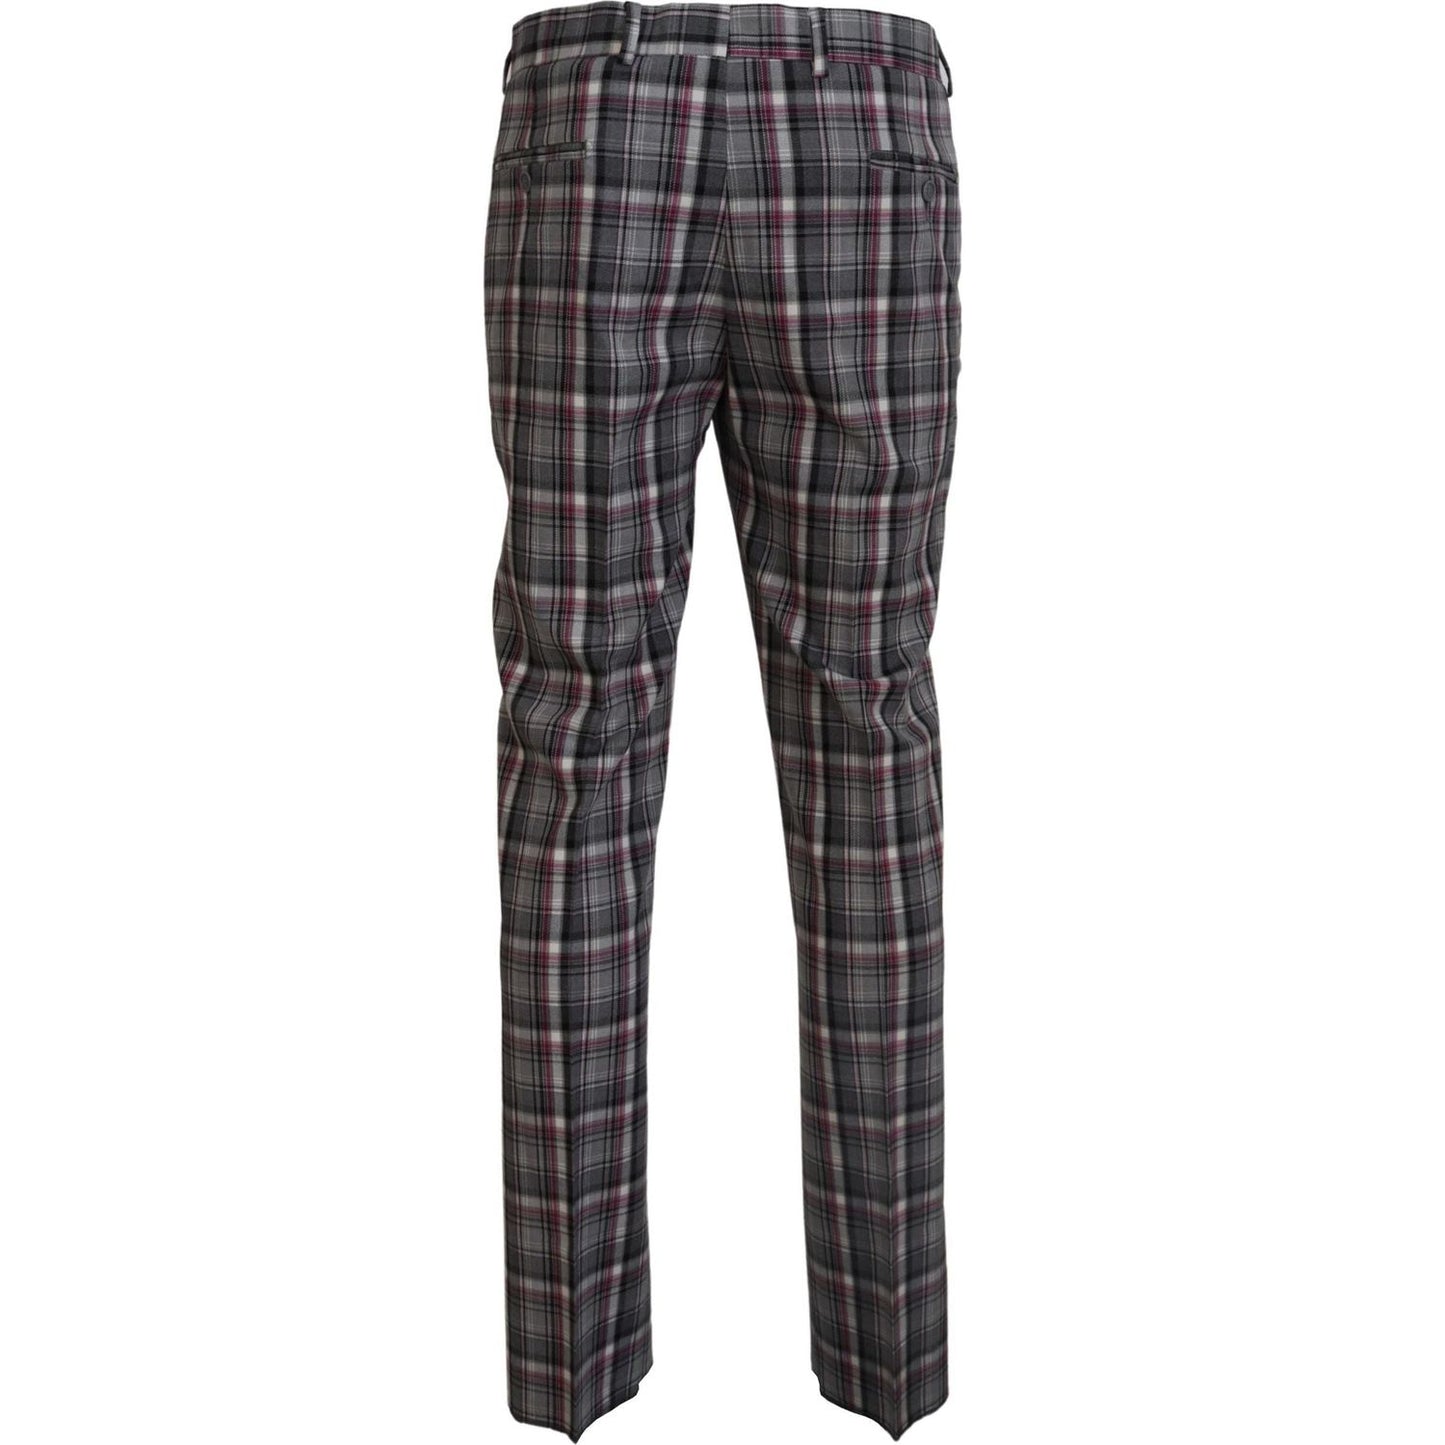 BENCIVENGA Checkered Couture Chino Pants for Men multicolor-checkered-men-pants